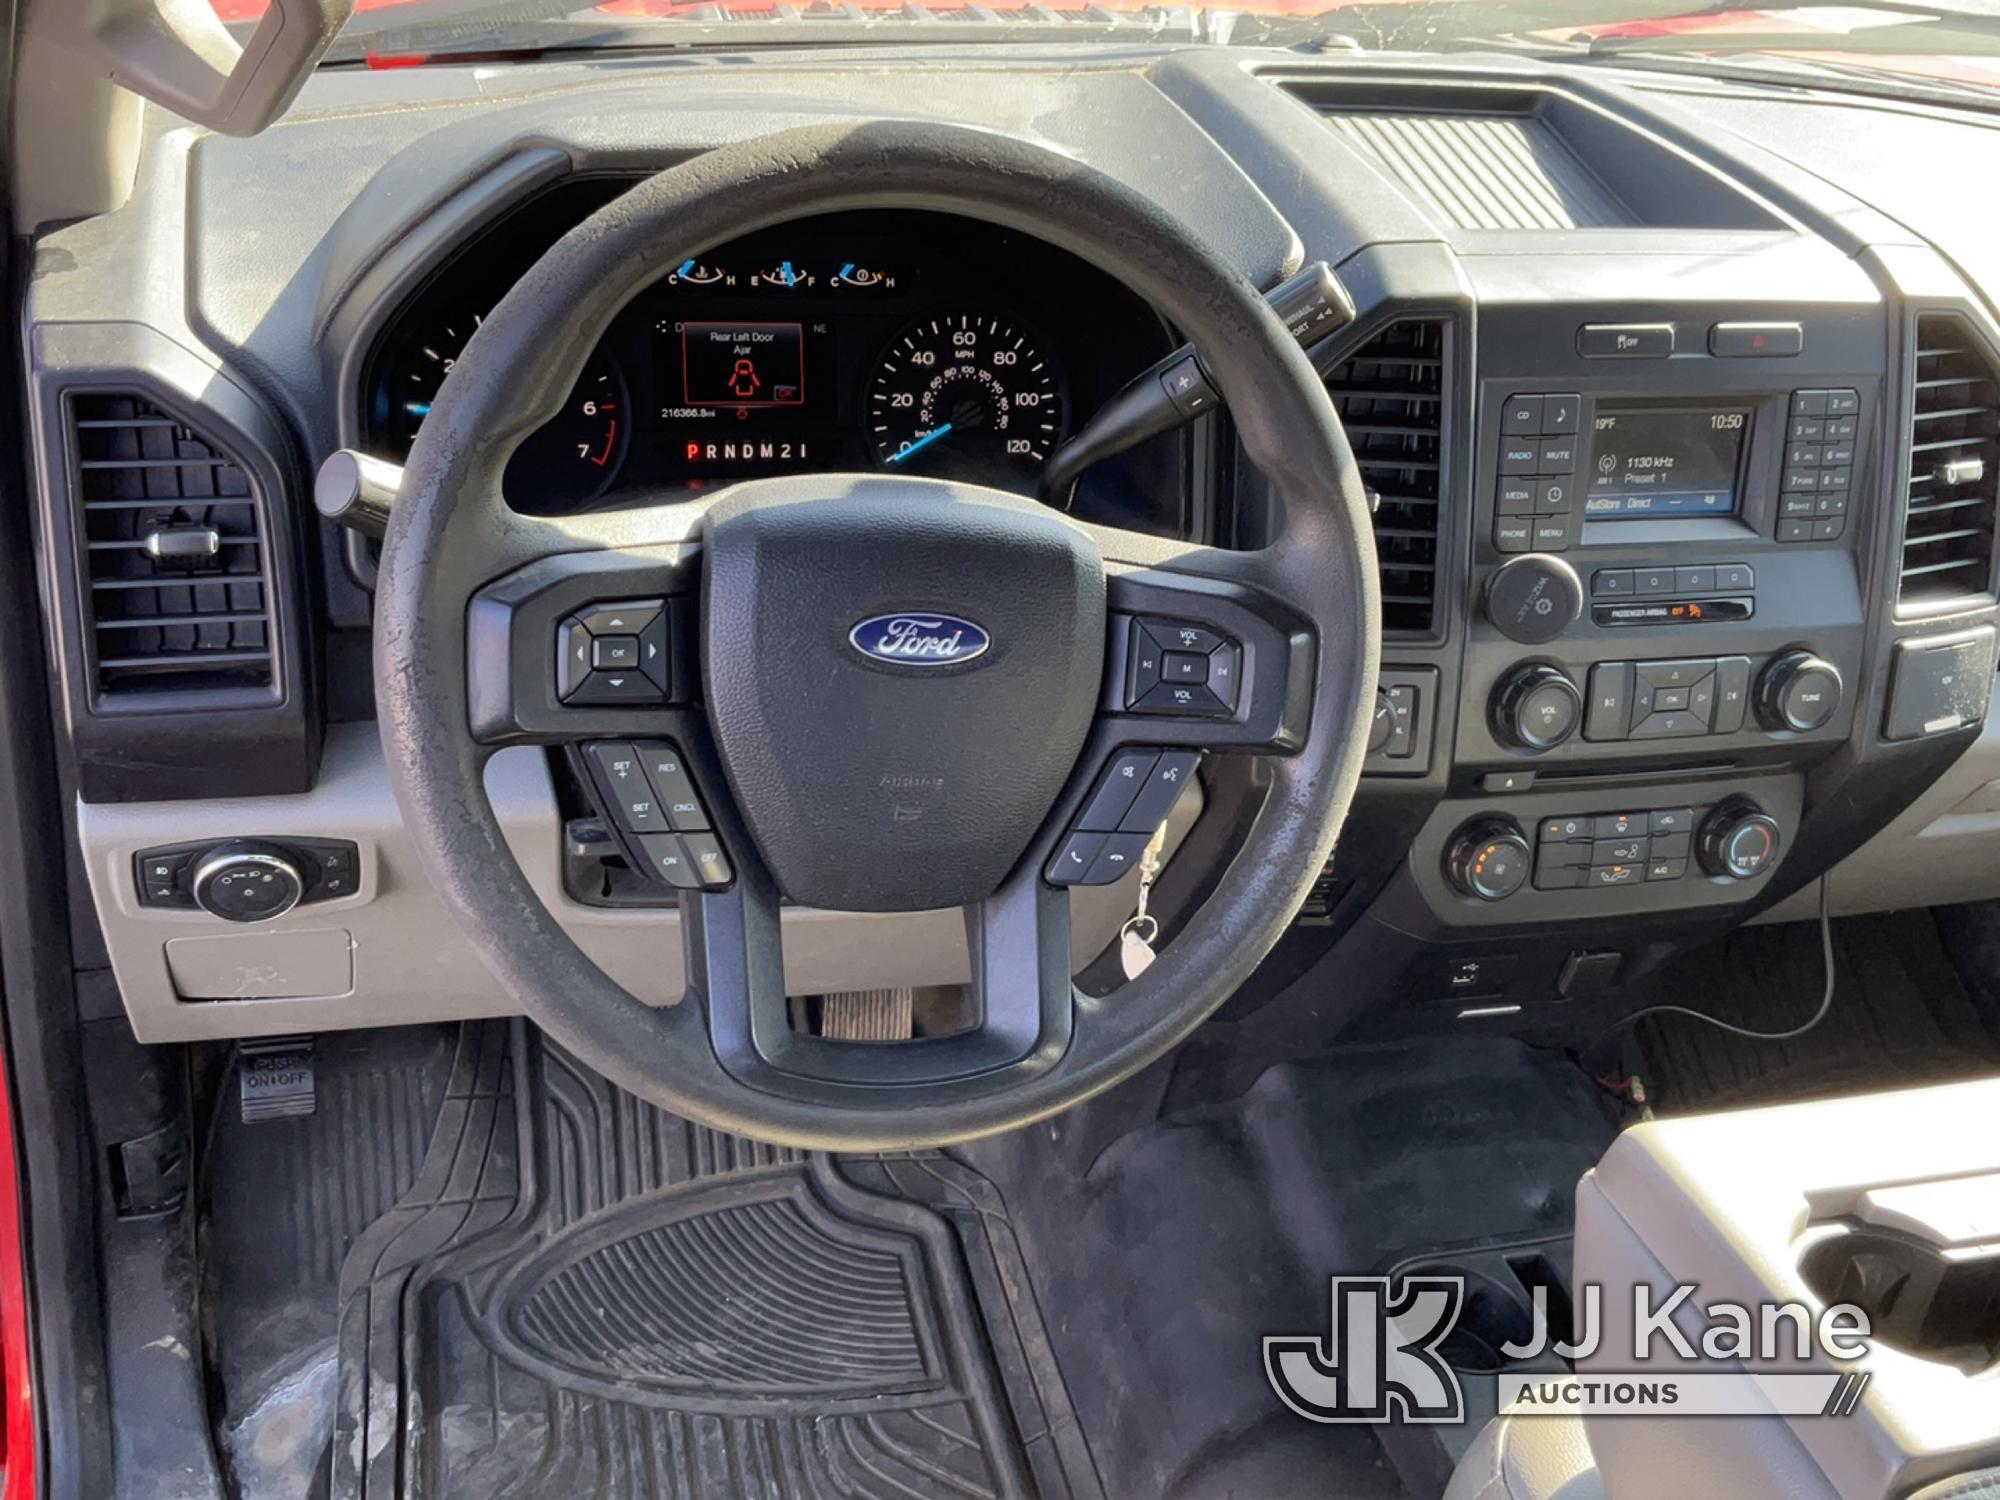 (Maple Lake, MN) 2017 Ford F150 4x4 Extended-Cab Pickup Truck Runs and Moves) (Per Seller: All HWY m